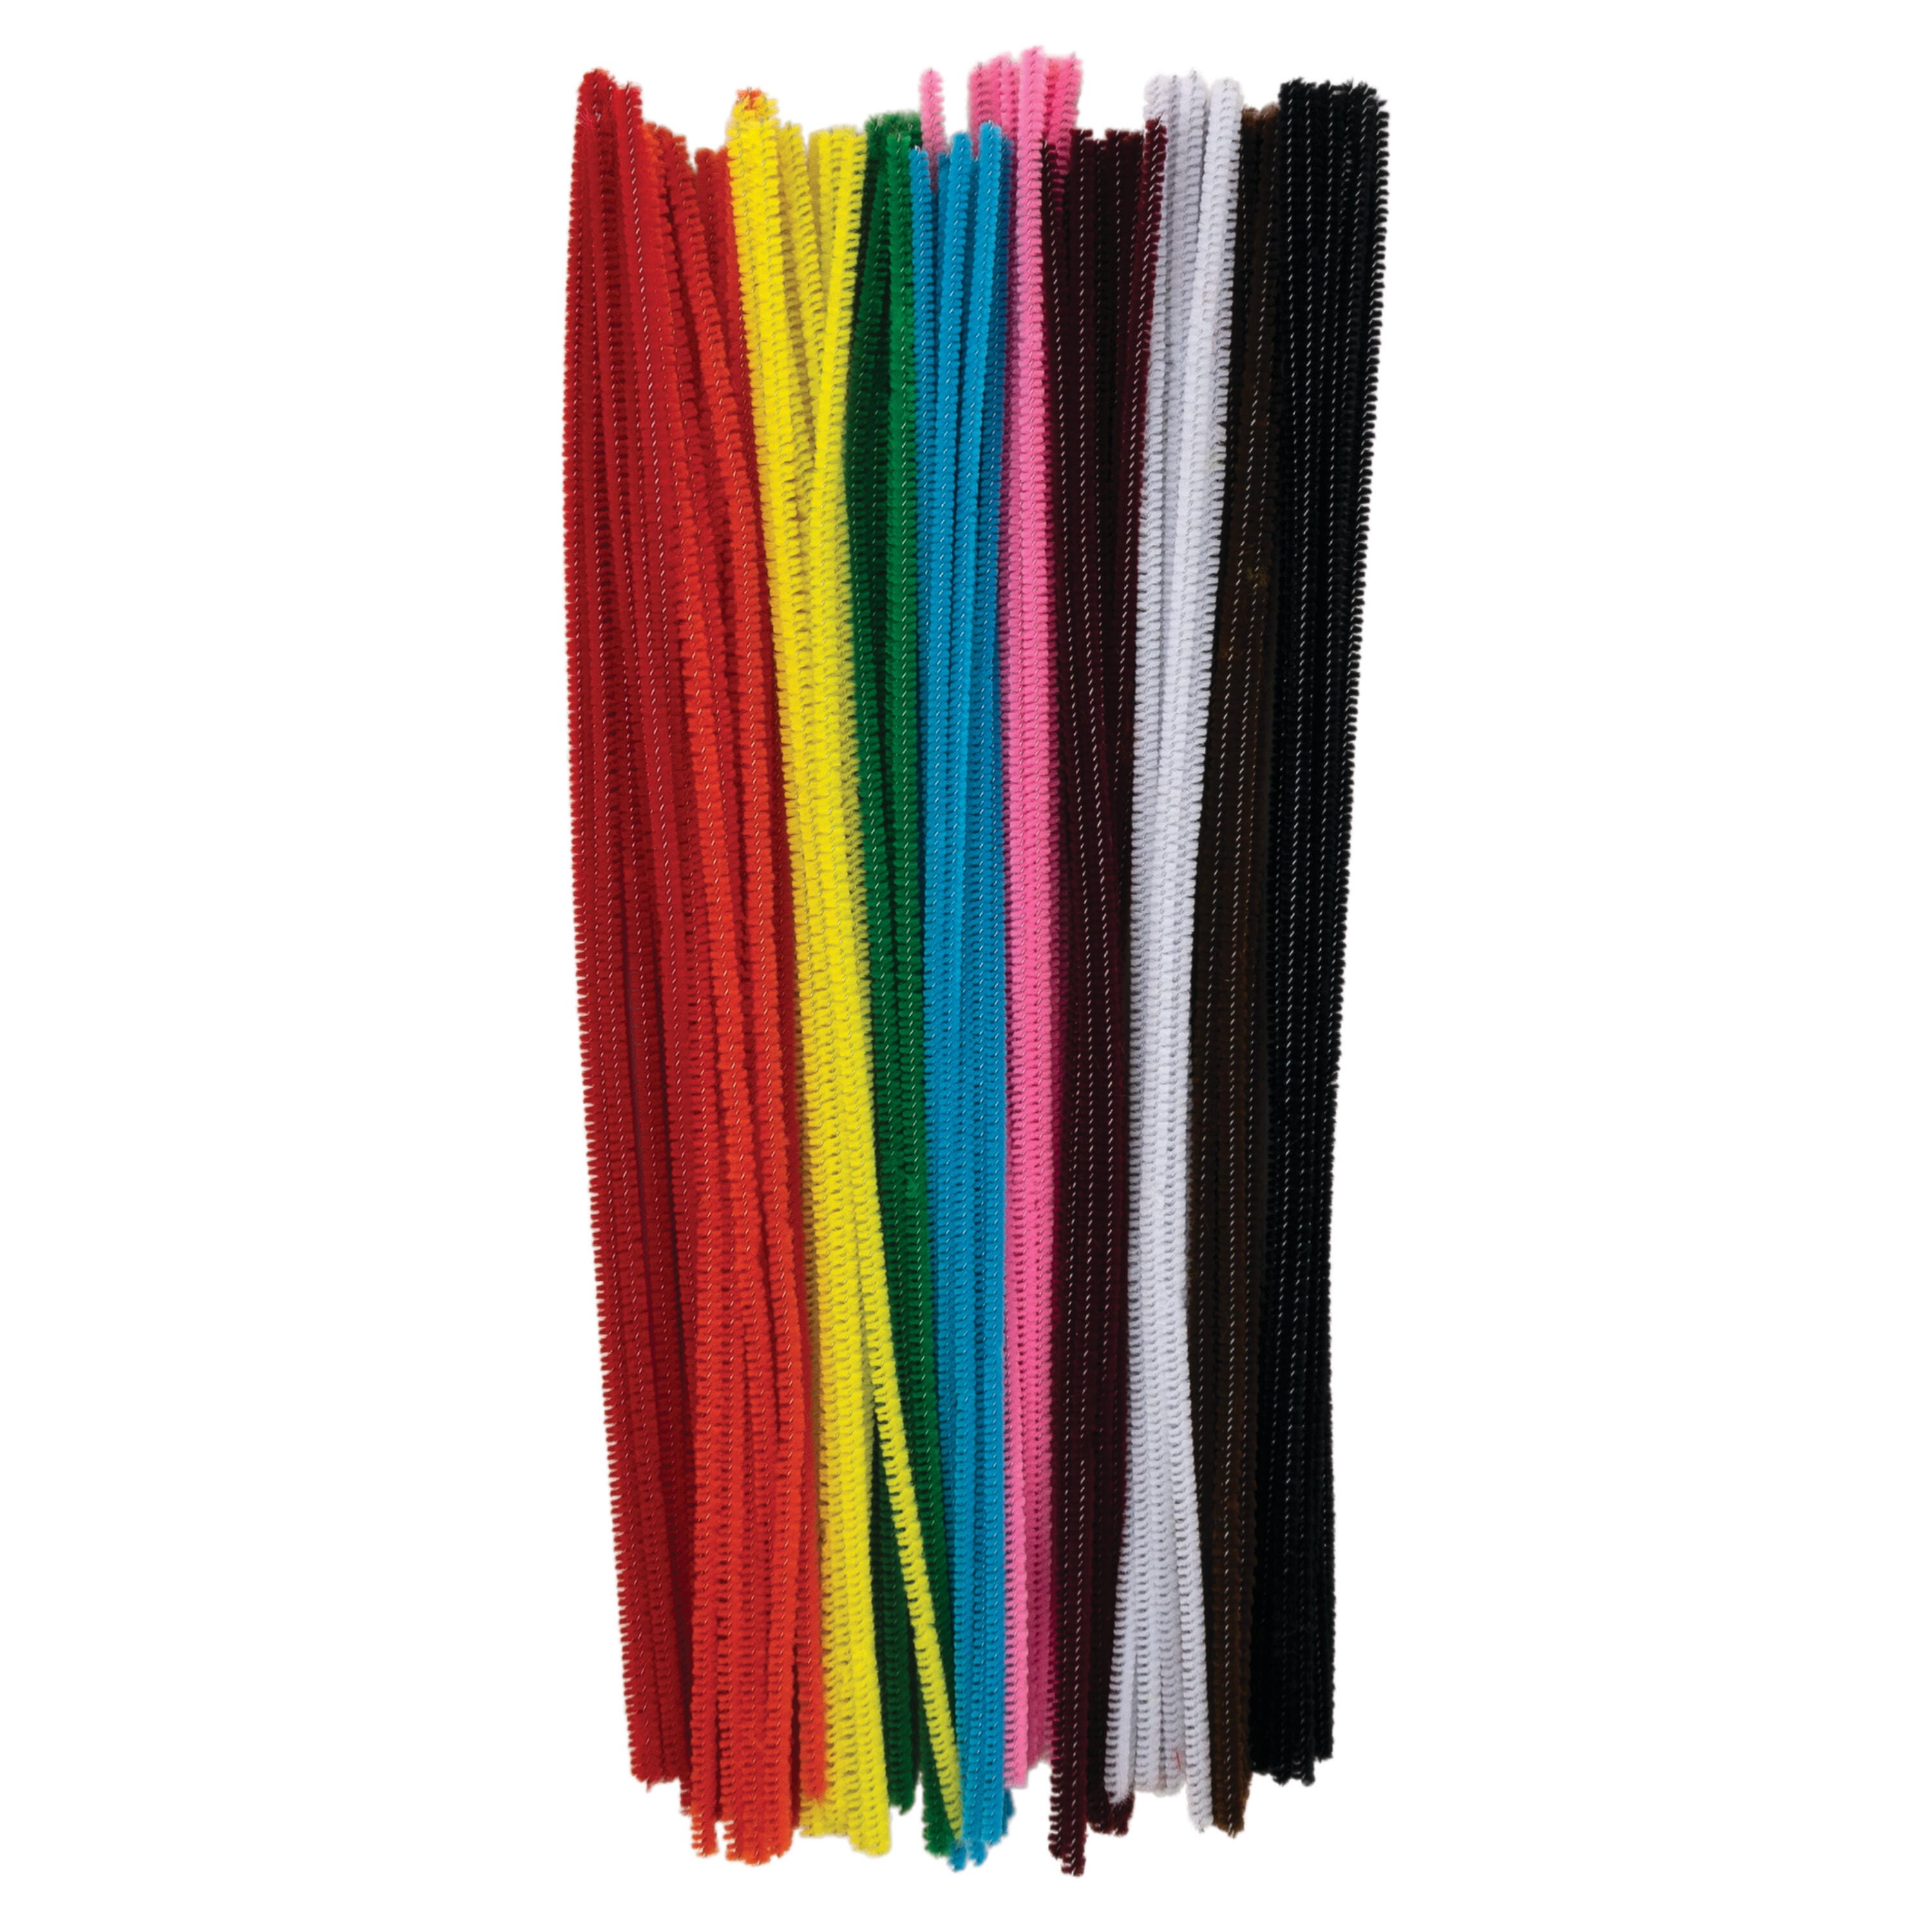 Creativity Street Standard Chenille Stems, 1/8 x 12 Inches, Various Colors, Pack of 100 - image 3 of 4